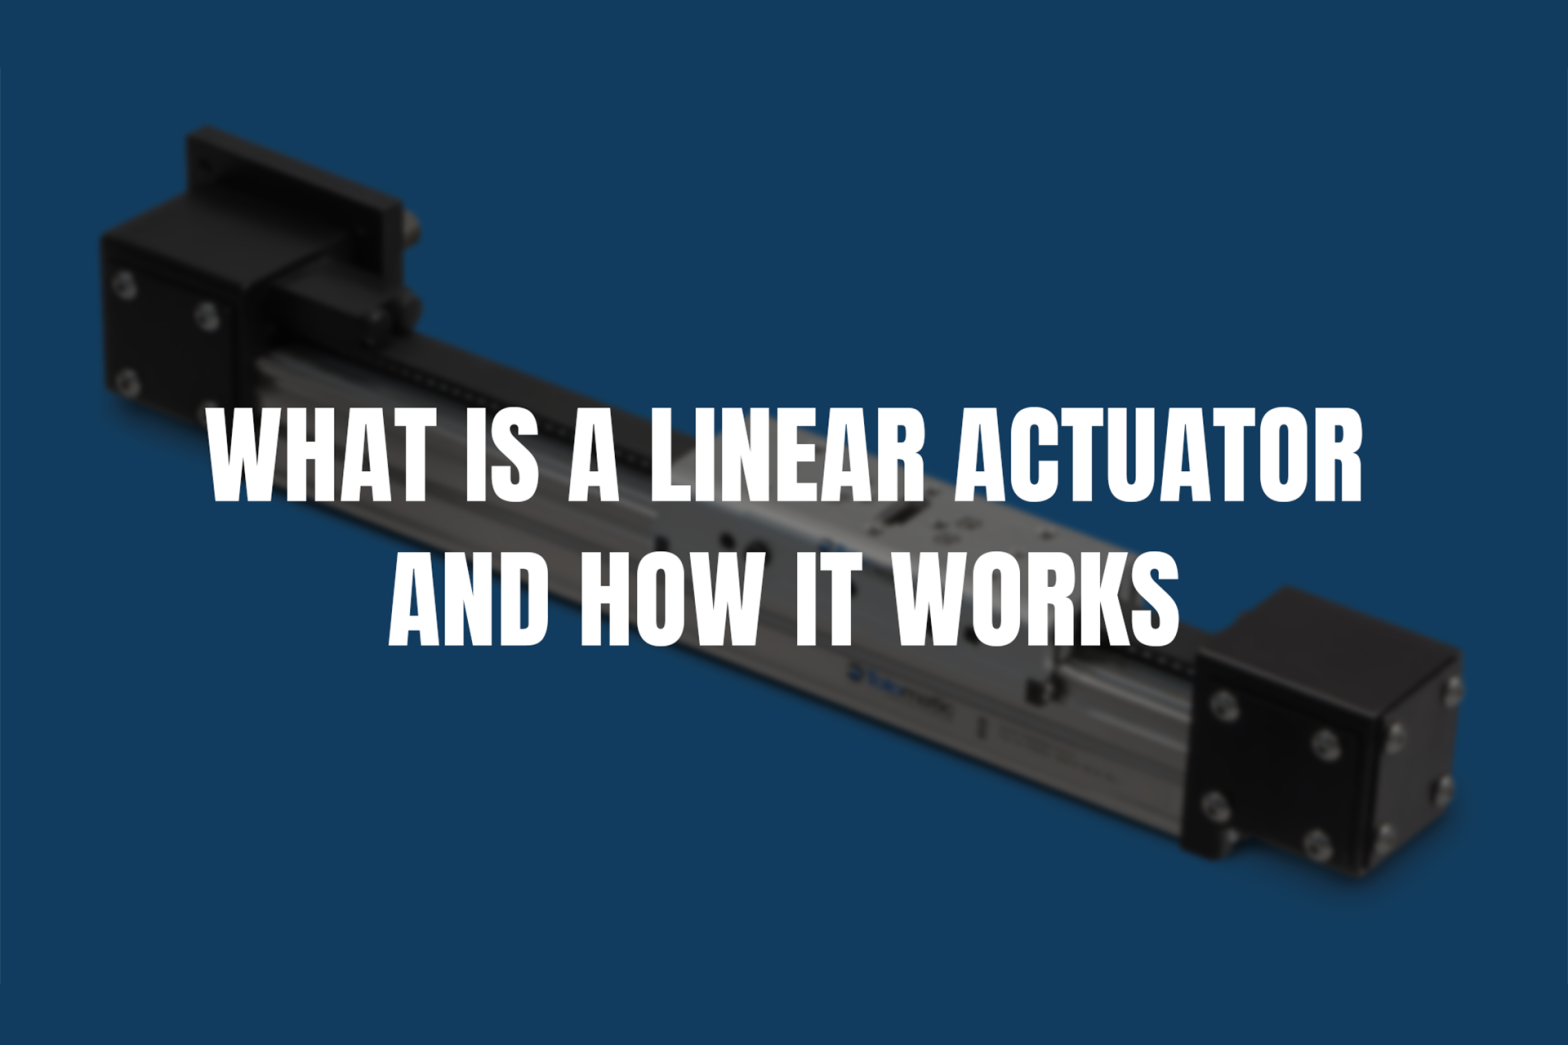 What is a Linear Actuator and How it works?